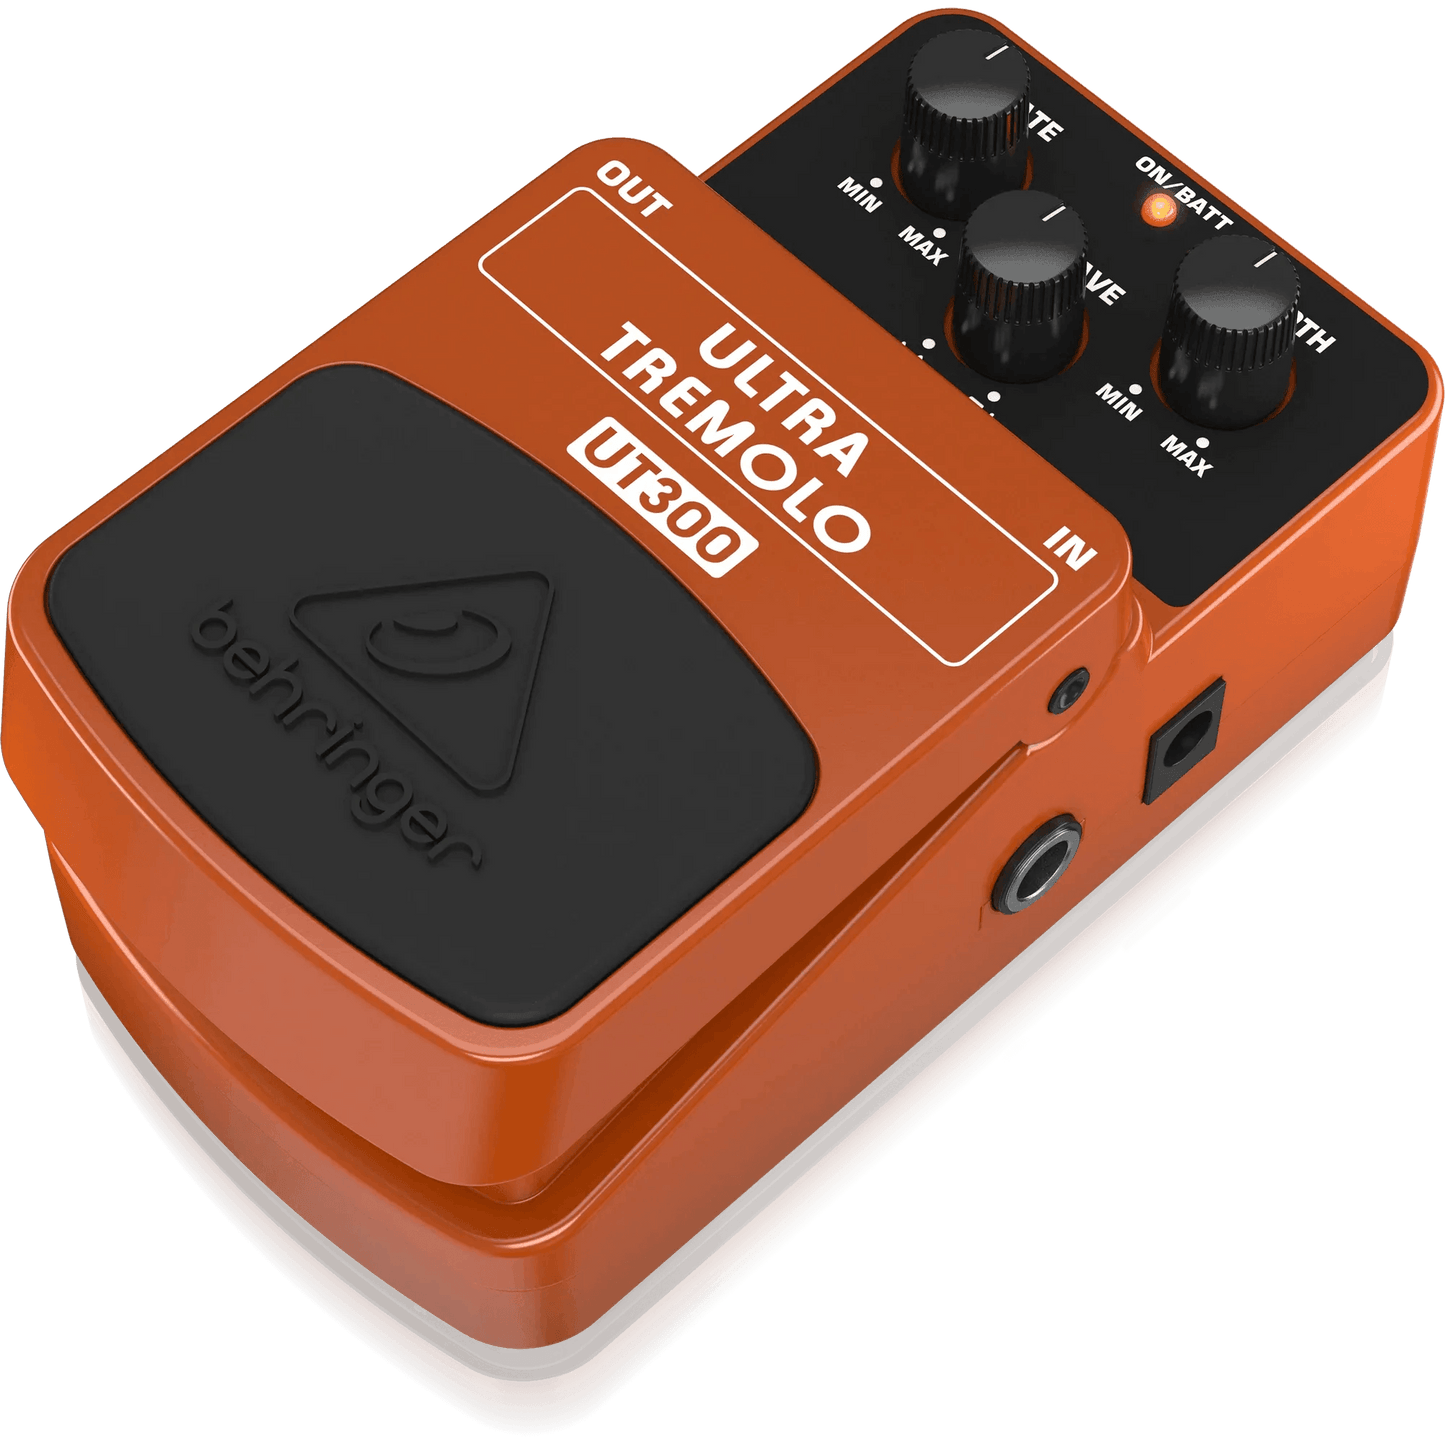 Behringer UT300 Classic Tremolo Effects Pedal